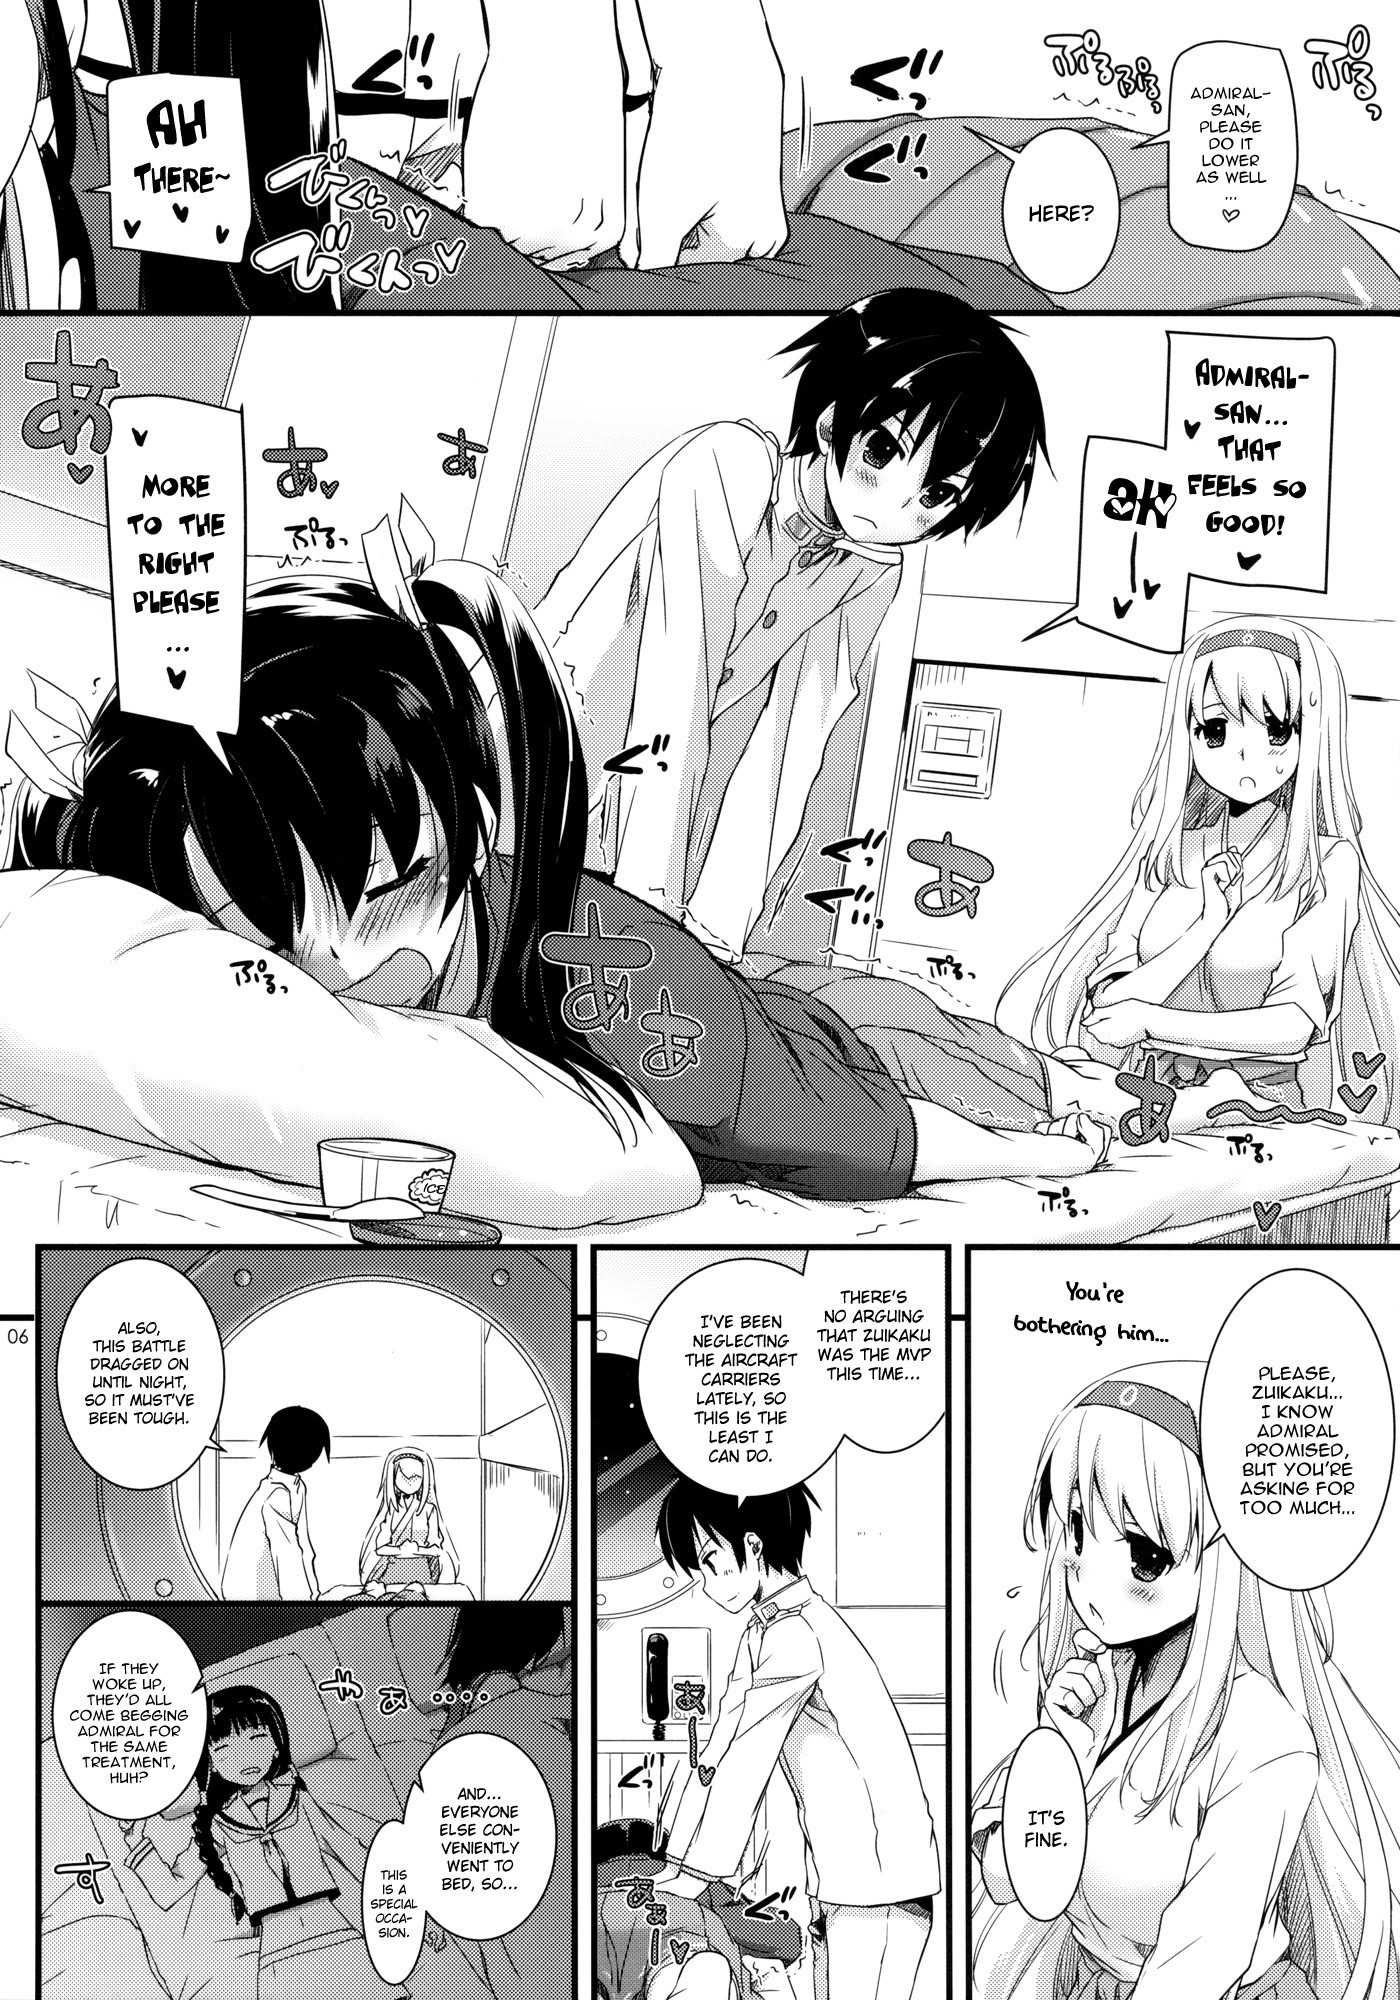 D.L. action 84 hentai manga picture 5